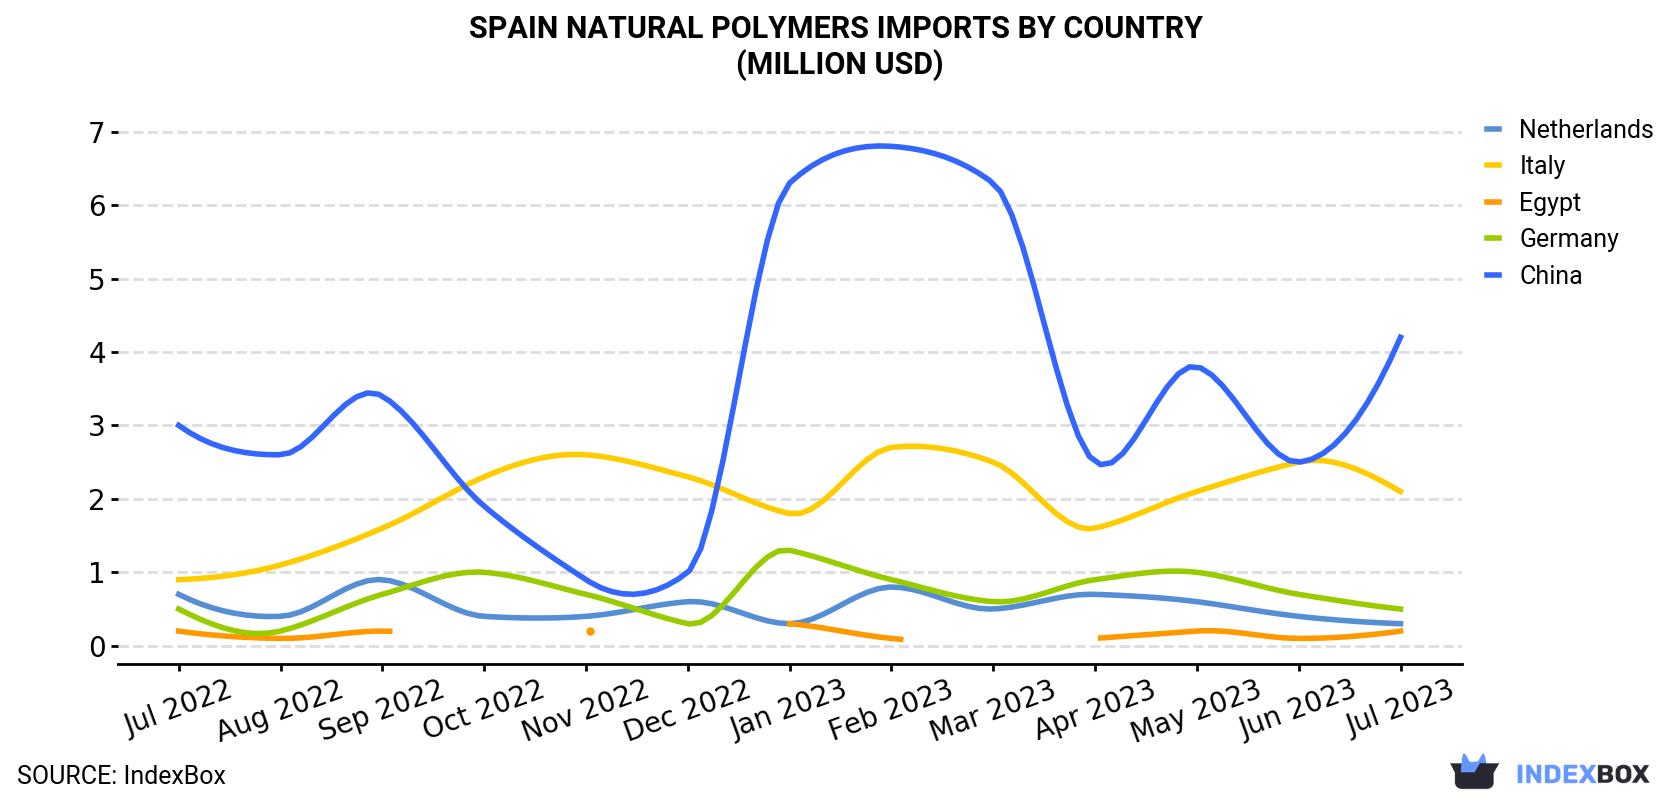 Spain Natural Polymers Imports By Country (Million USD)